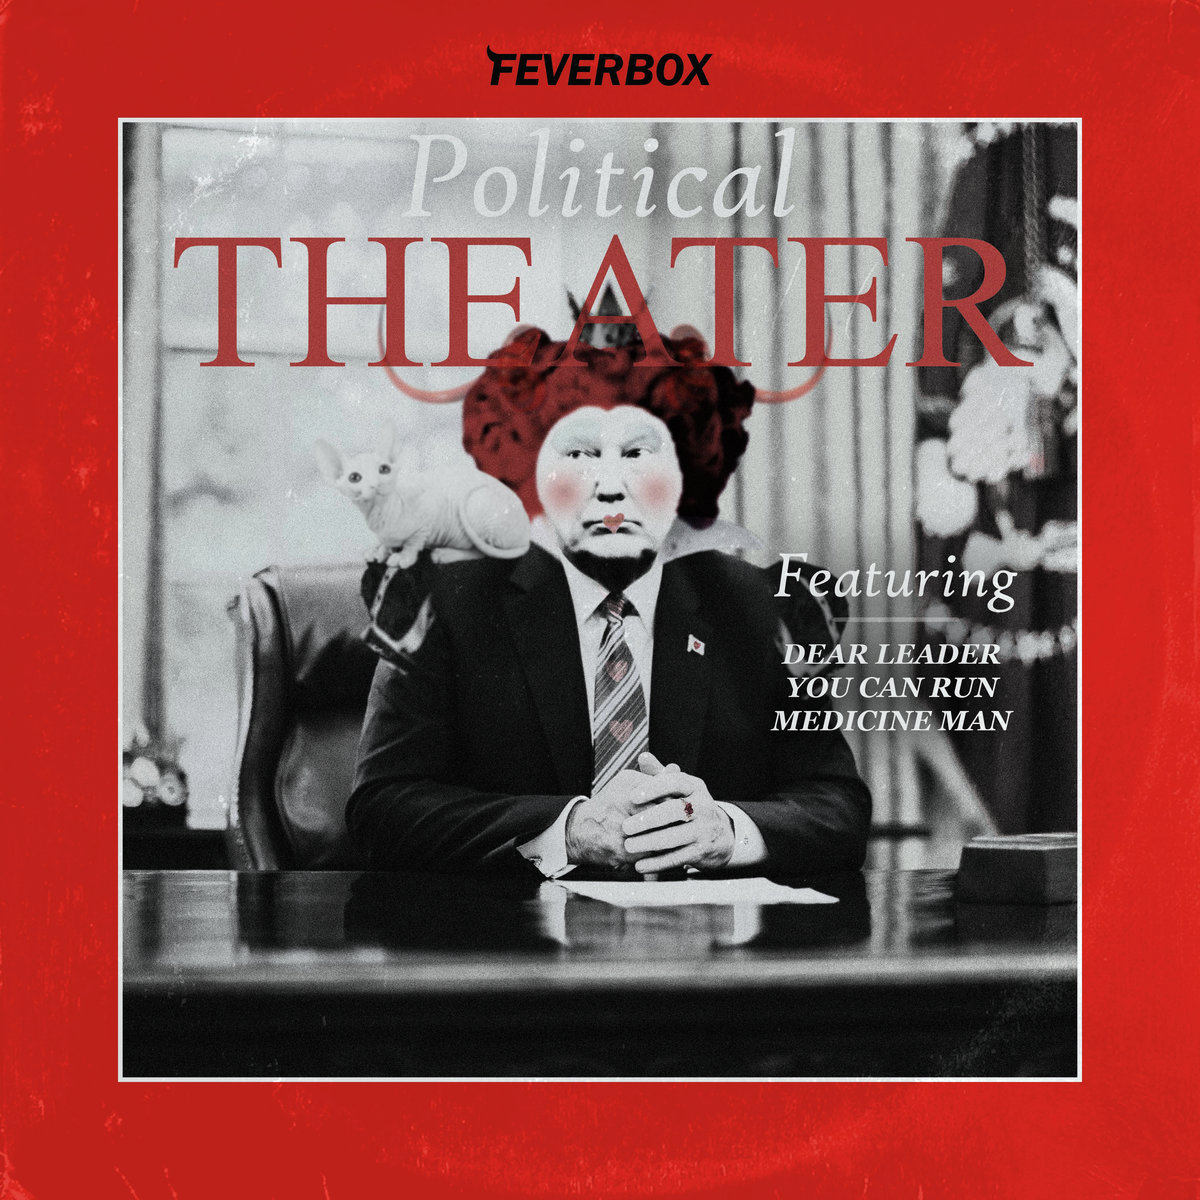 Feverbox – Political Theater